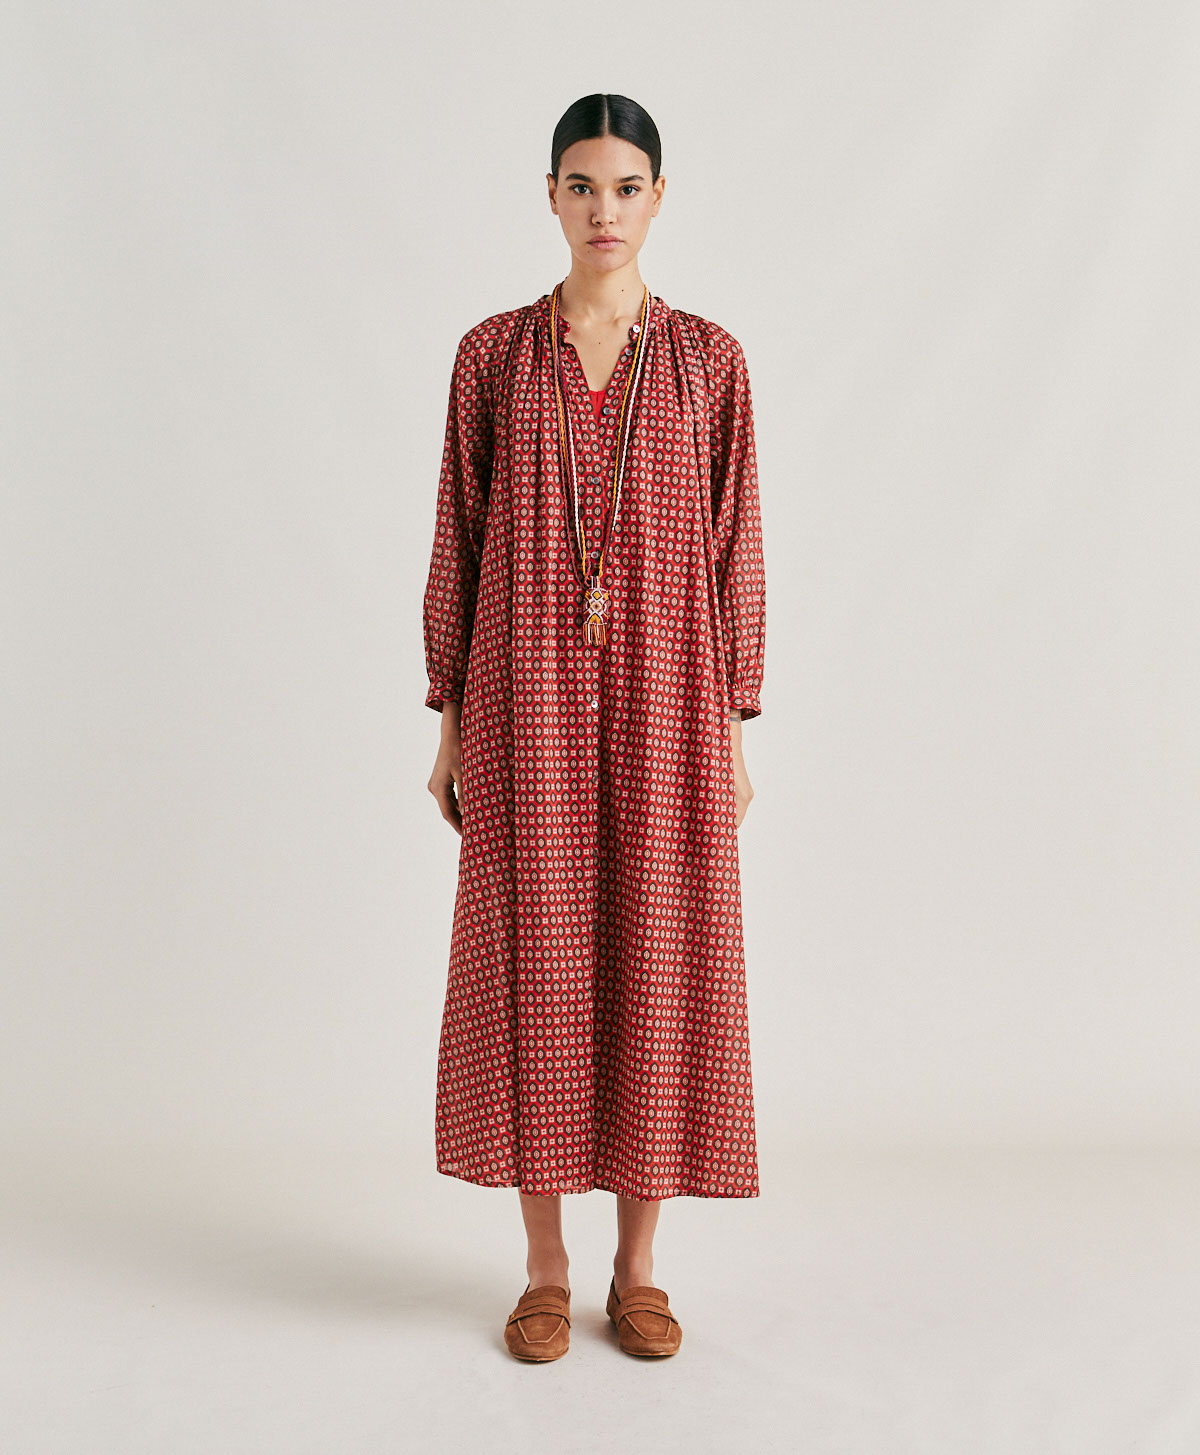 GOA DRESS IN PRINTED COTTON VOILE - RED - Momonì